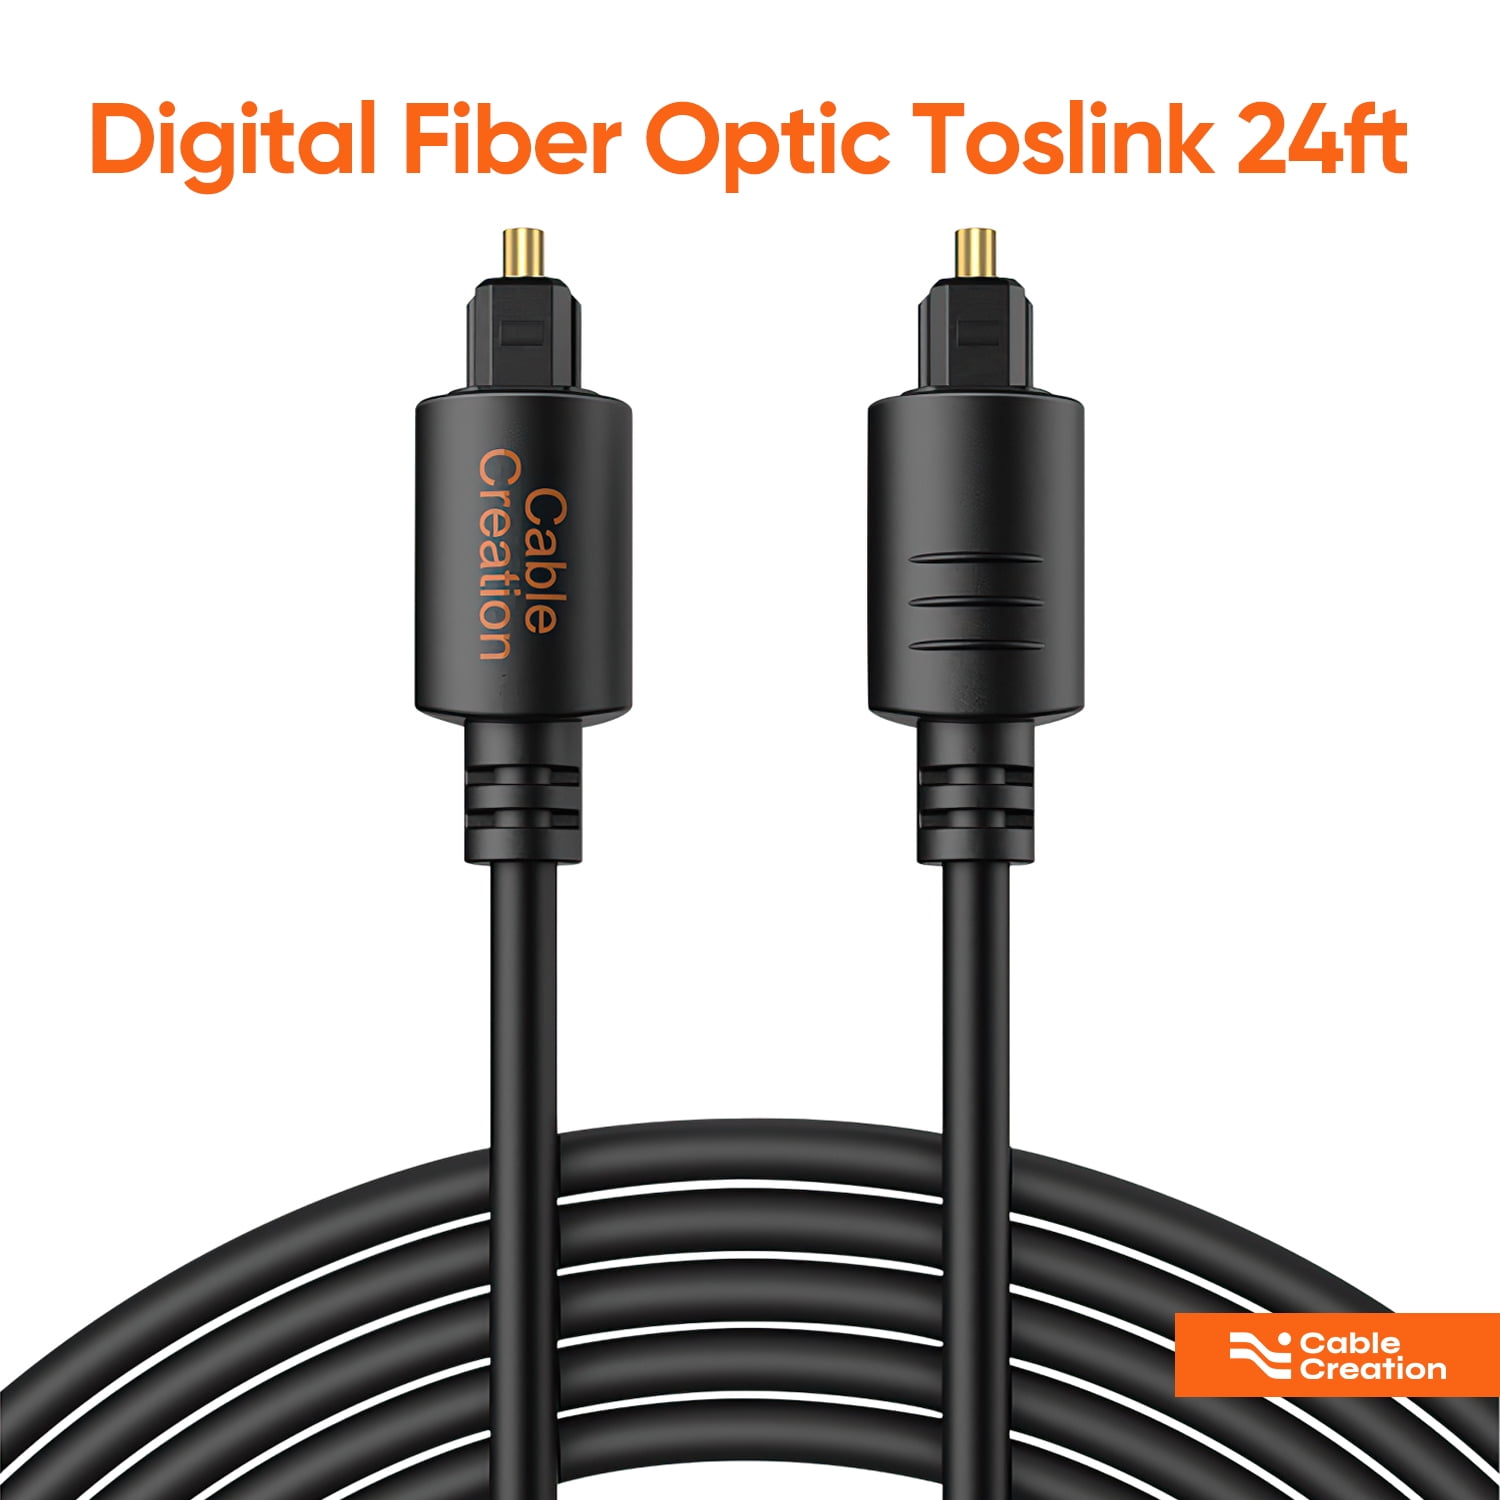 CableCreation 50ft Digital Optical Toslink Cable,S/PDIF Fiber Optic Cable,Fiber Optic Digital Audio slim Cable Sound TV, PS4, Xbox, Playstation - Walmart.com